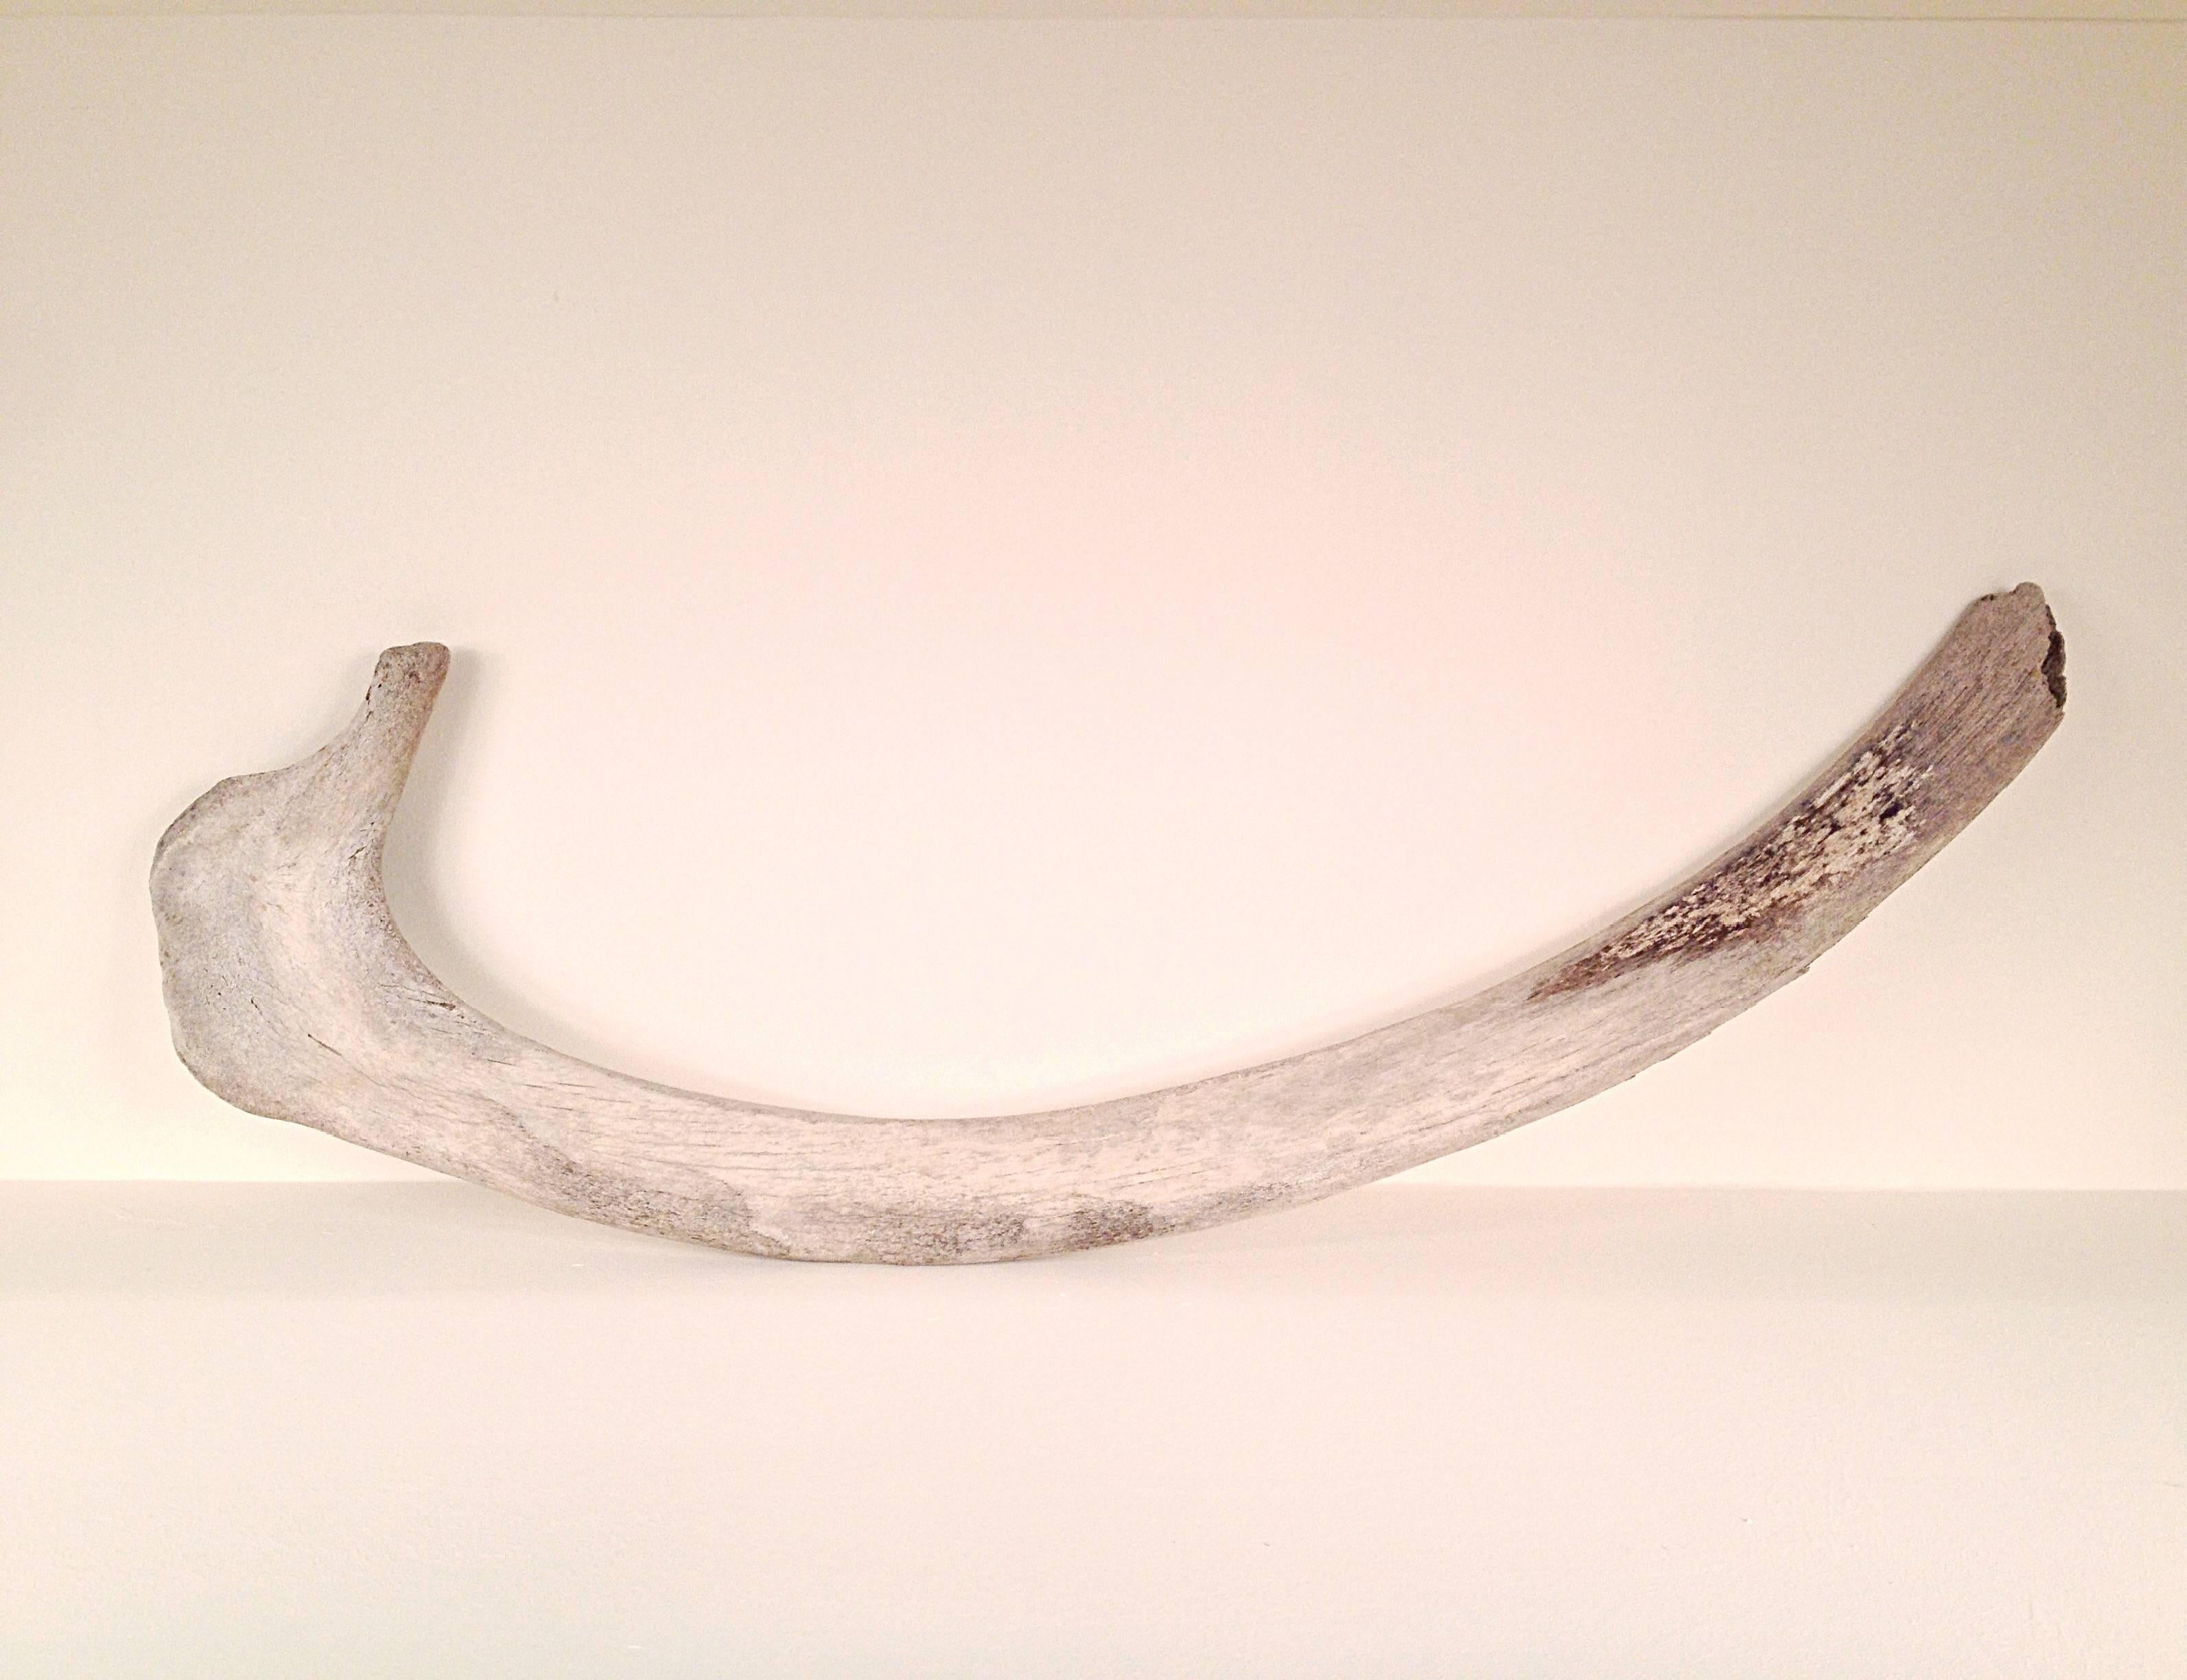 Large 19th Century Whale Rib Bone  In Excellent Condition For Sale In By Appointment Only, Ontario